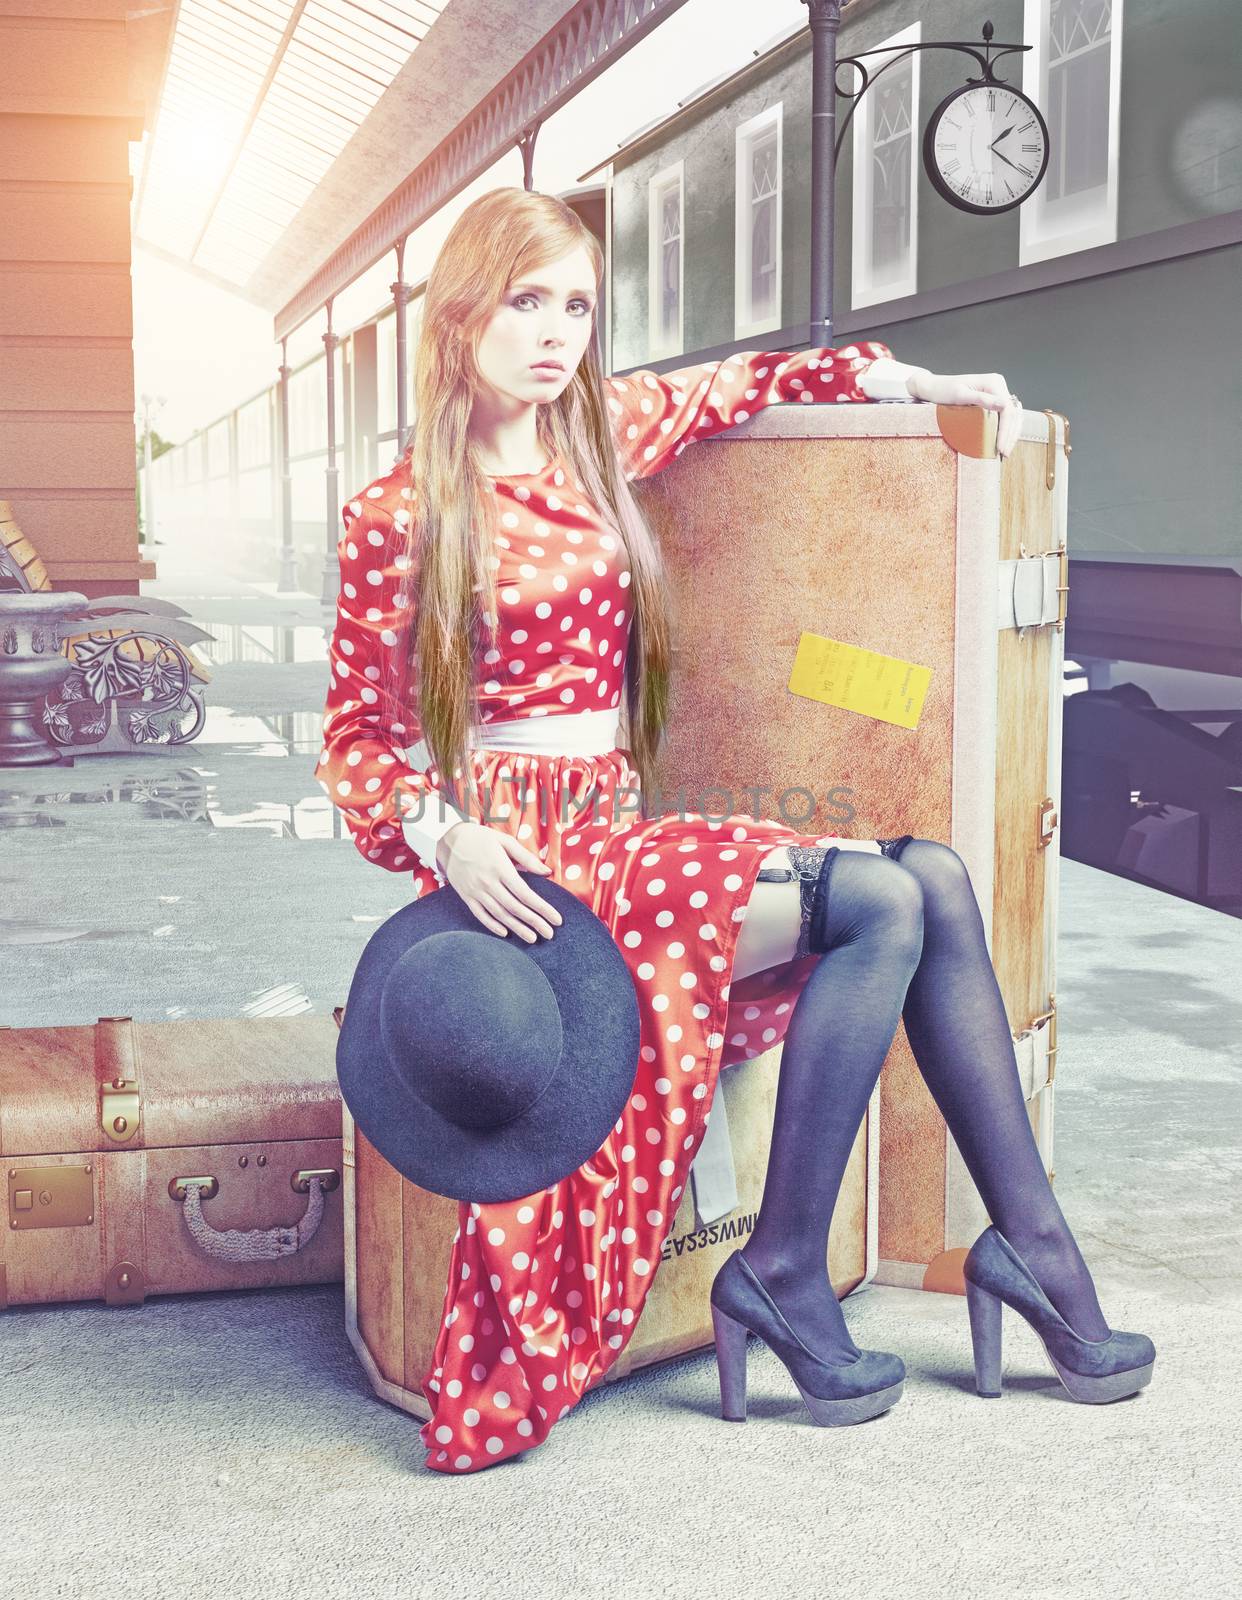 The girl sitting on the suitcase waiting at the retro railway station 